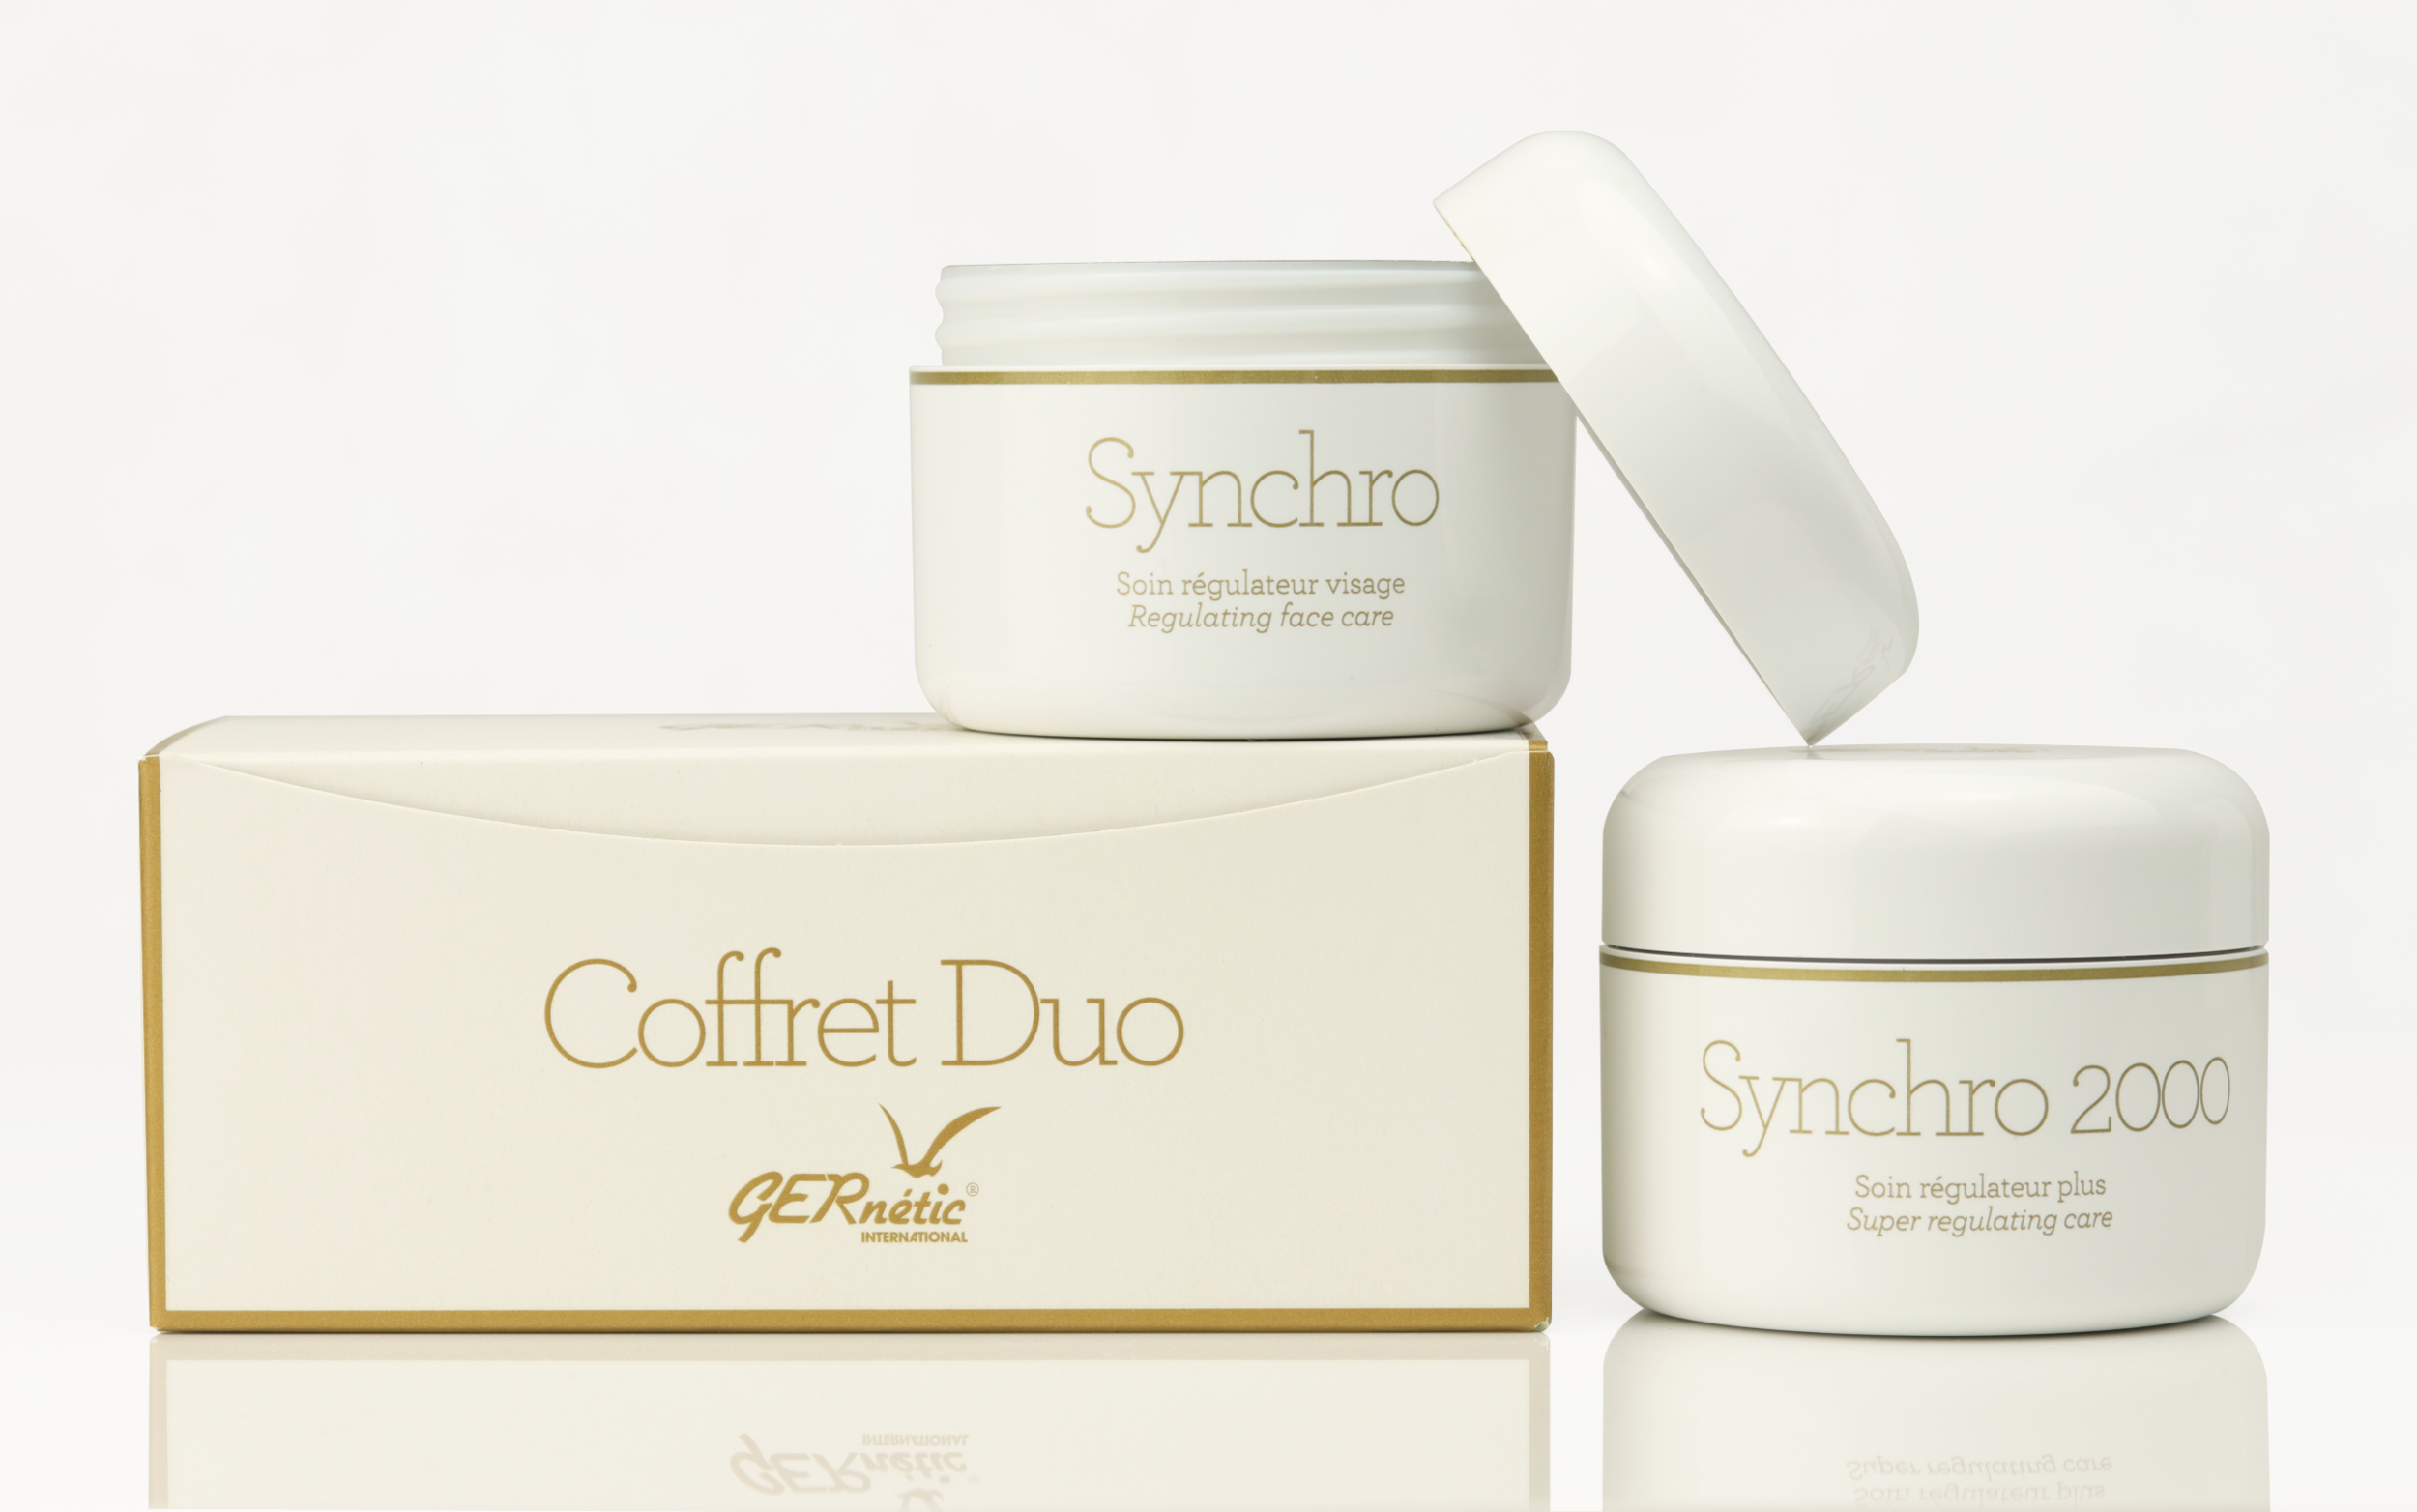 Gernetic duo pack synchro synchro 2000 (2)